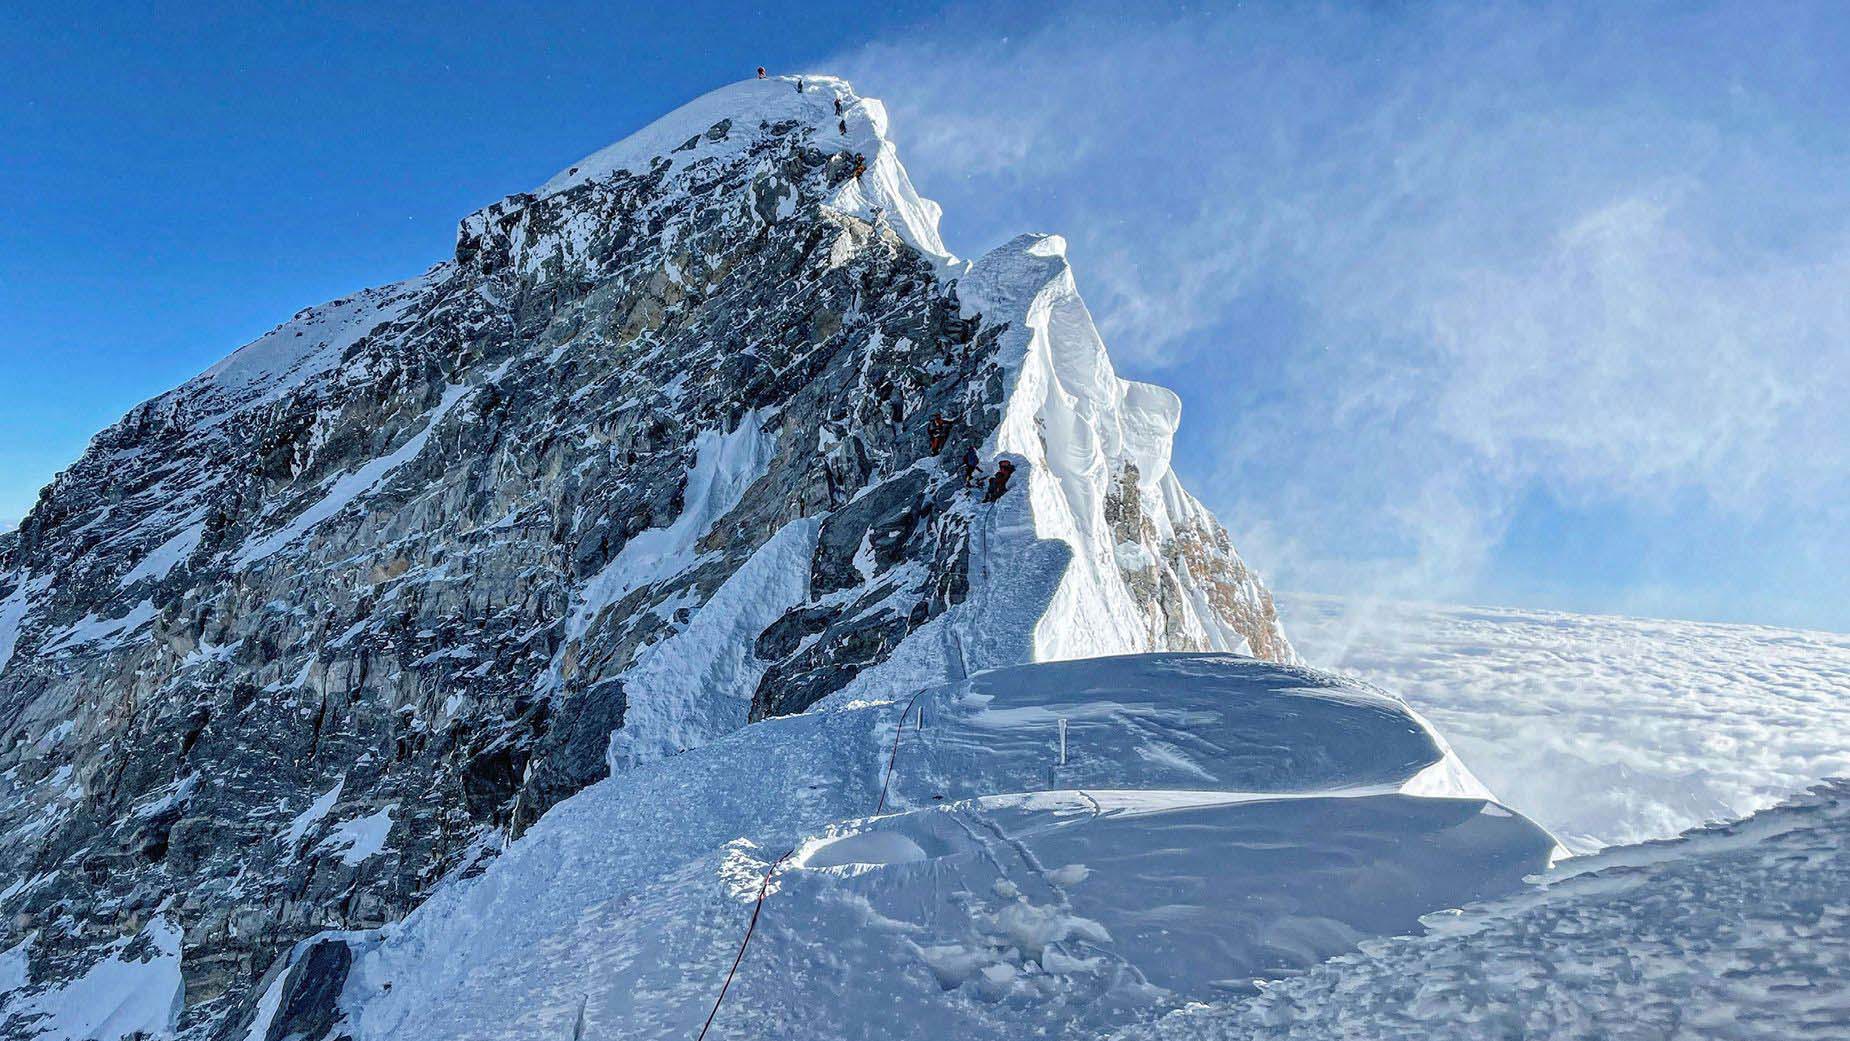  Mountaineers climbing the Hillary Step during their ascend of the South face to summit Mount Everest in May 2021.